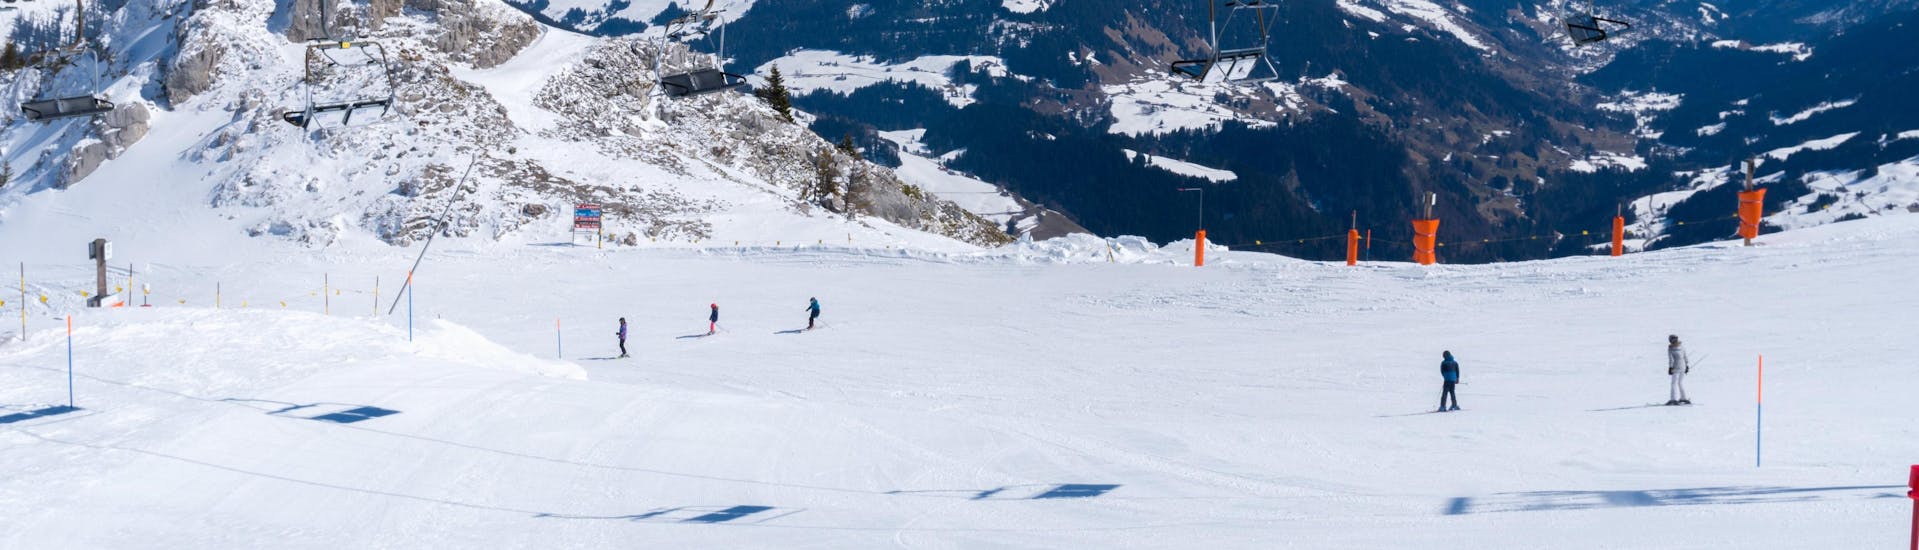 An image of several skiers riding down one of the ski slopes in the Swiss ski resort of Leysin, a popular destination for aspiring skiers who wish to learn to ski by taking ski lessons with one of the local ski schools.